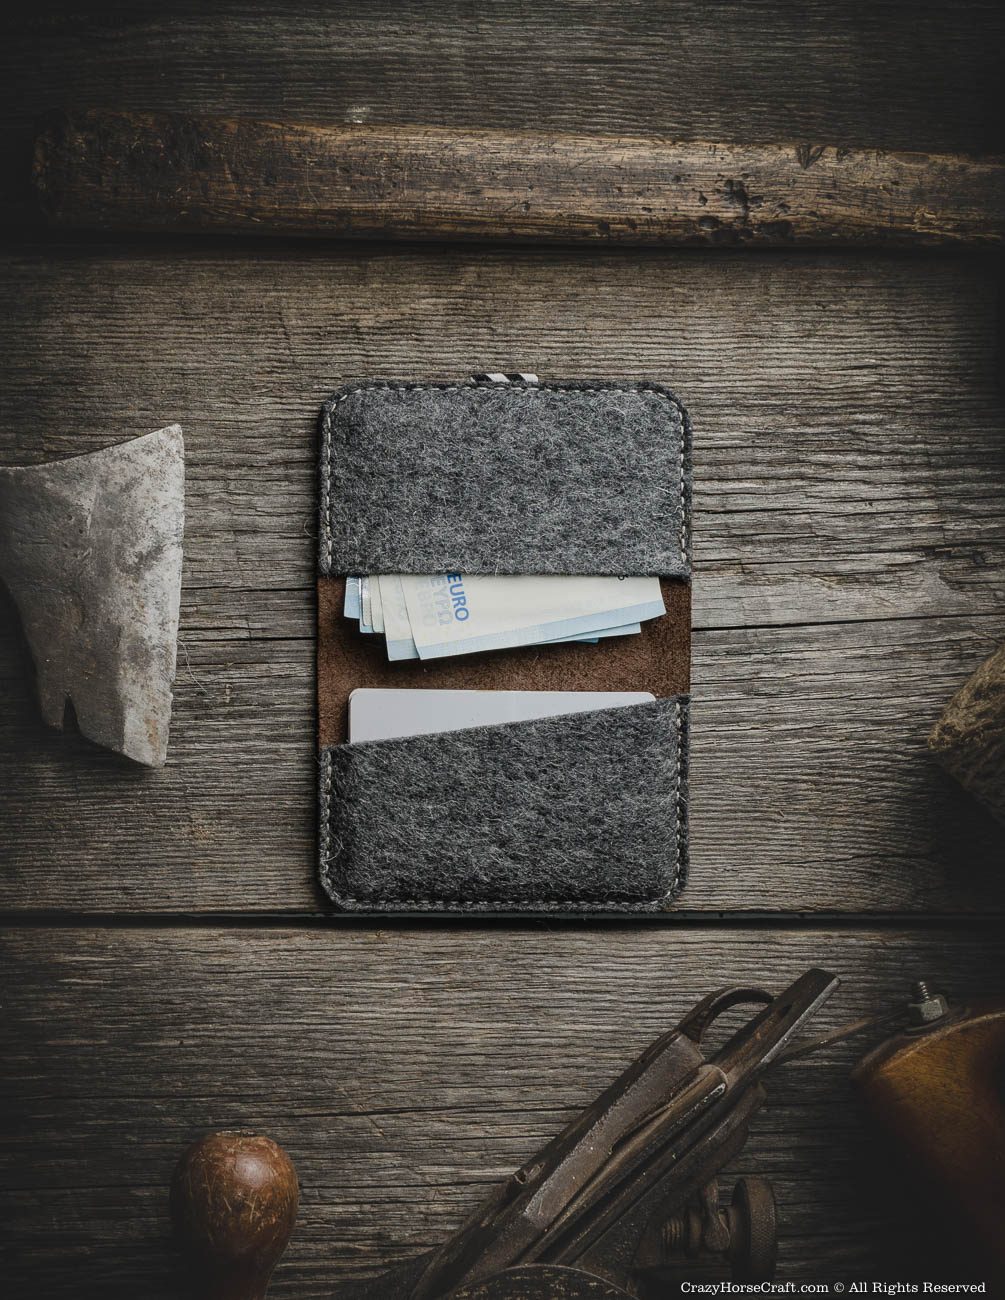 Leather minimalist vintage style wallet with card holder inside